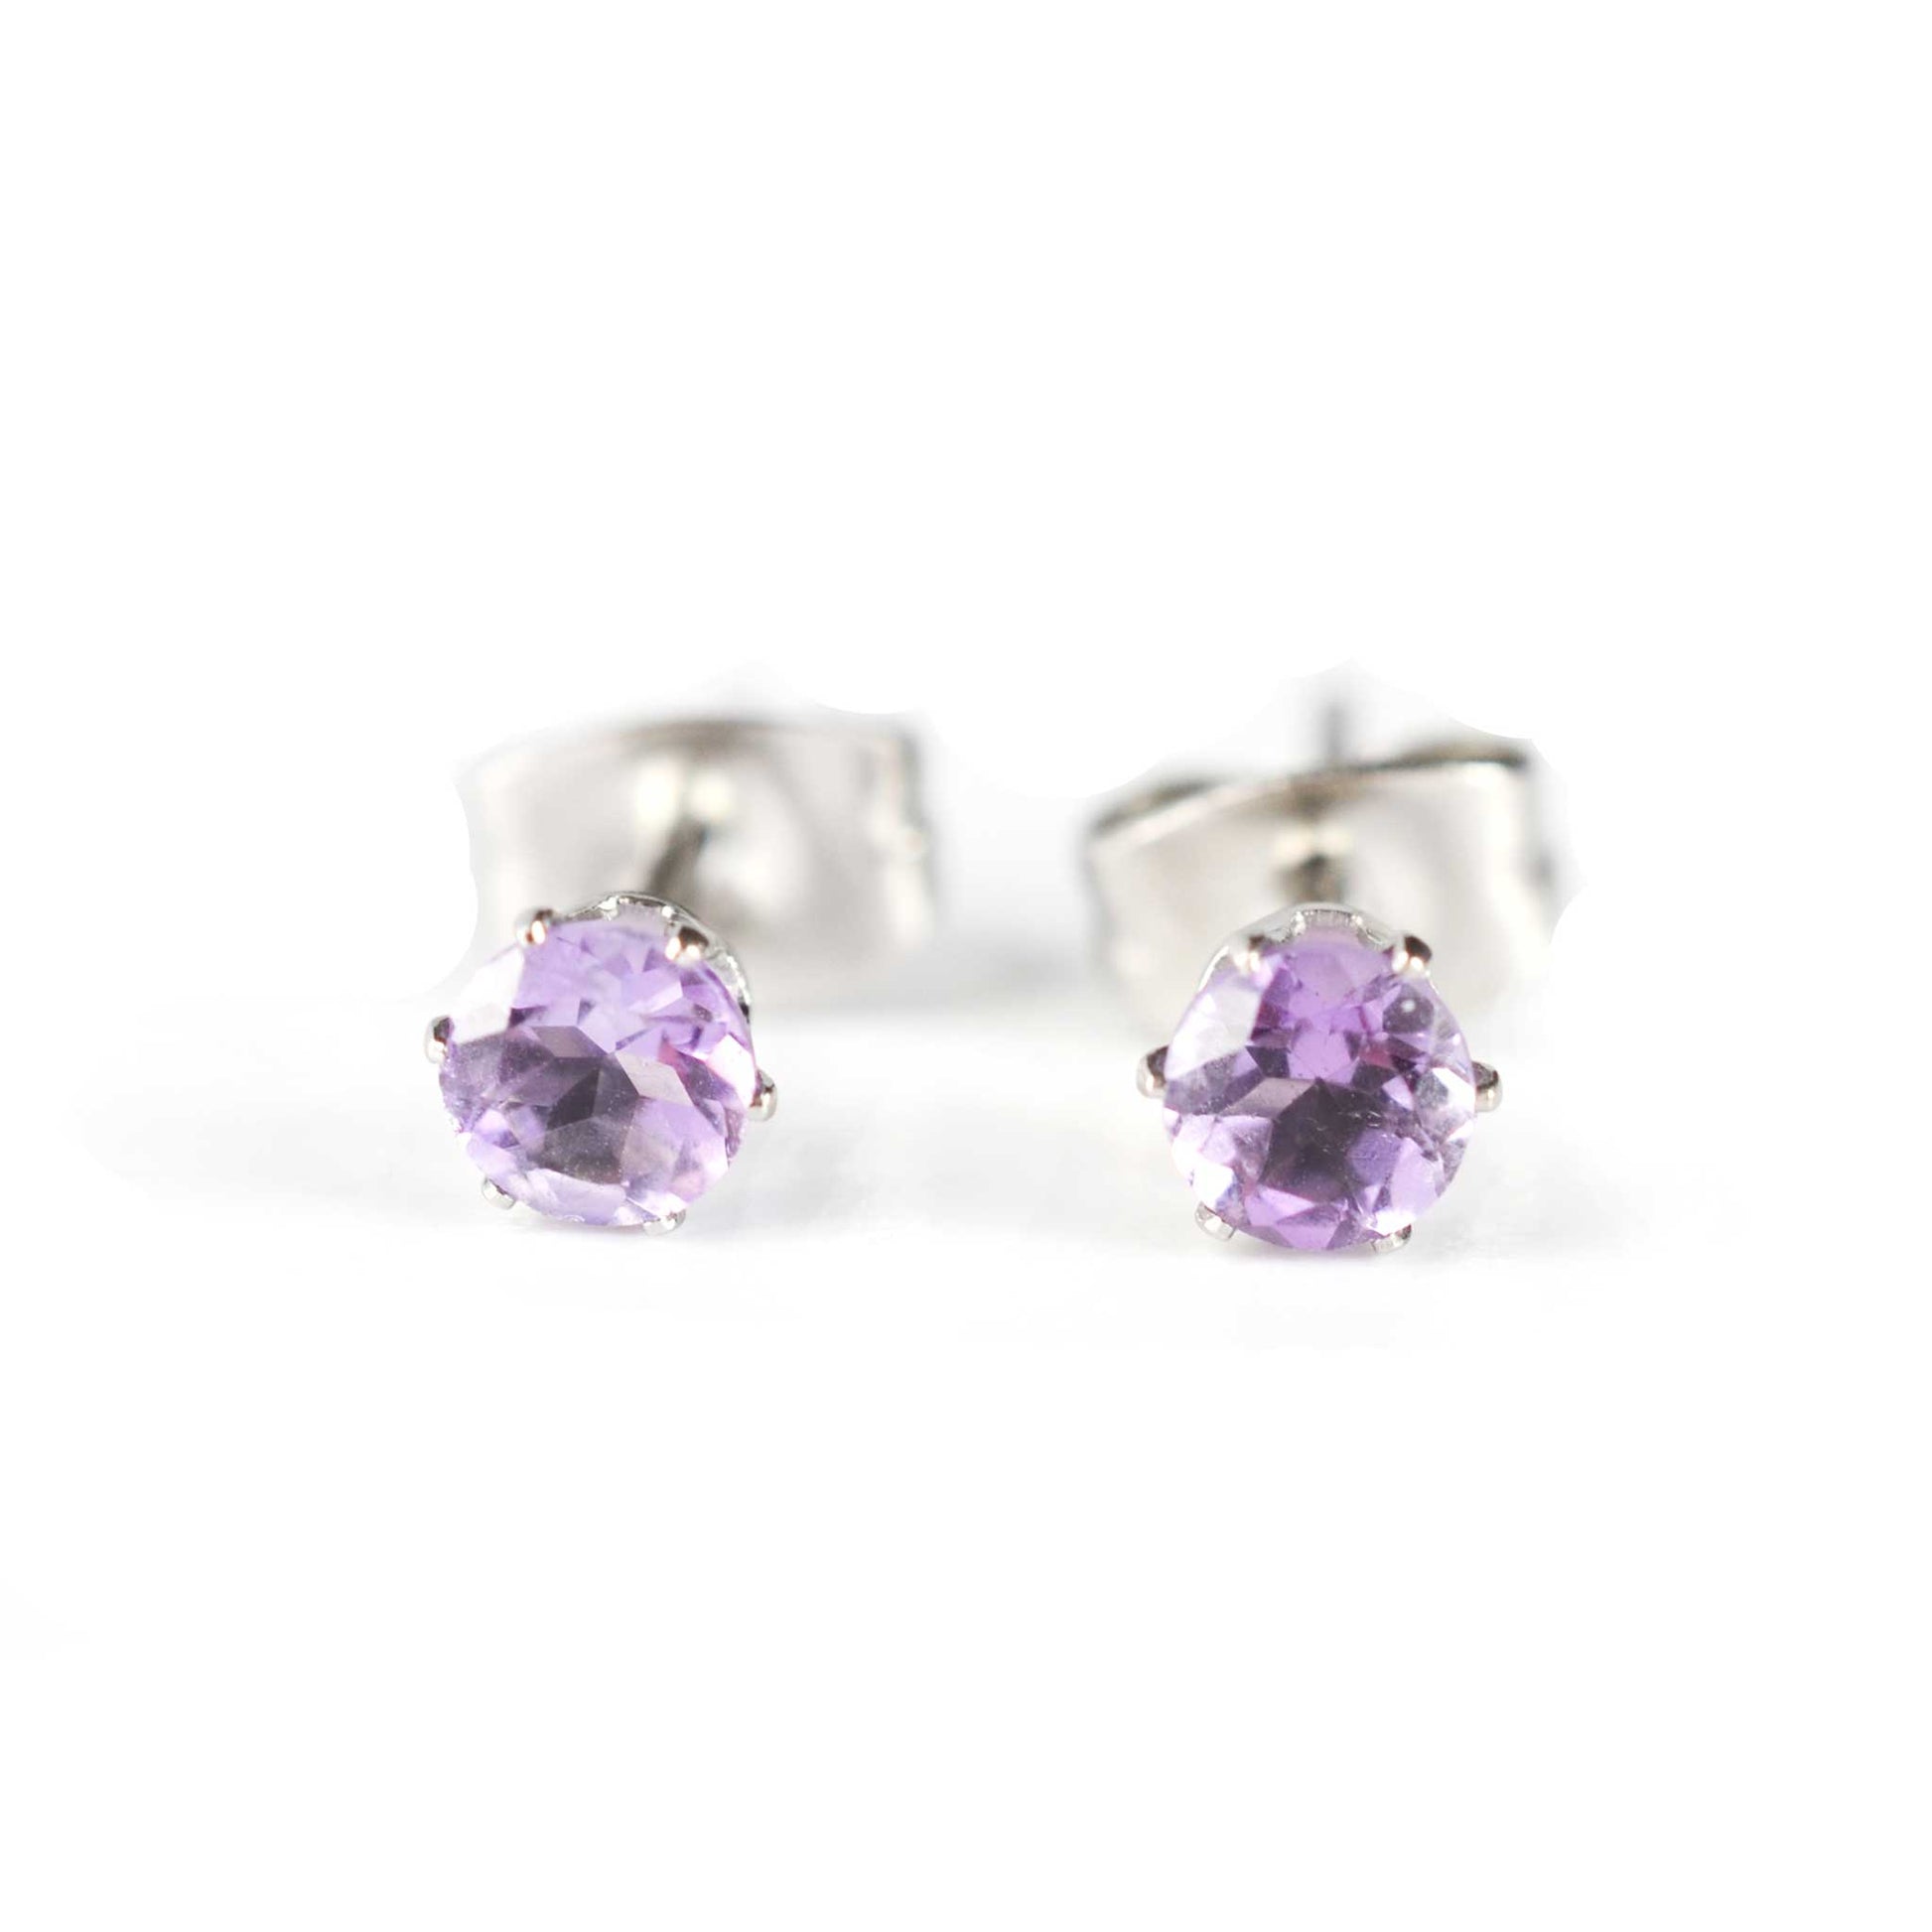 Front view of tiny purple faceted Amethyst stud earrings on white background